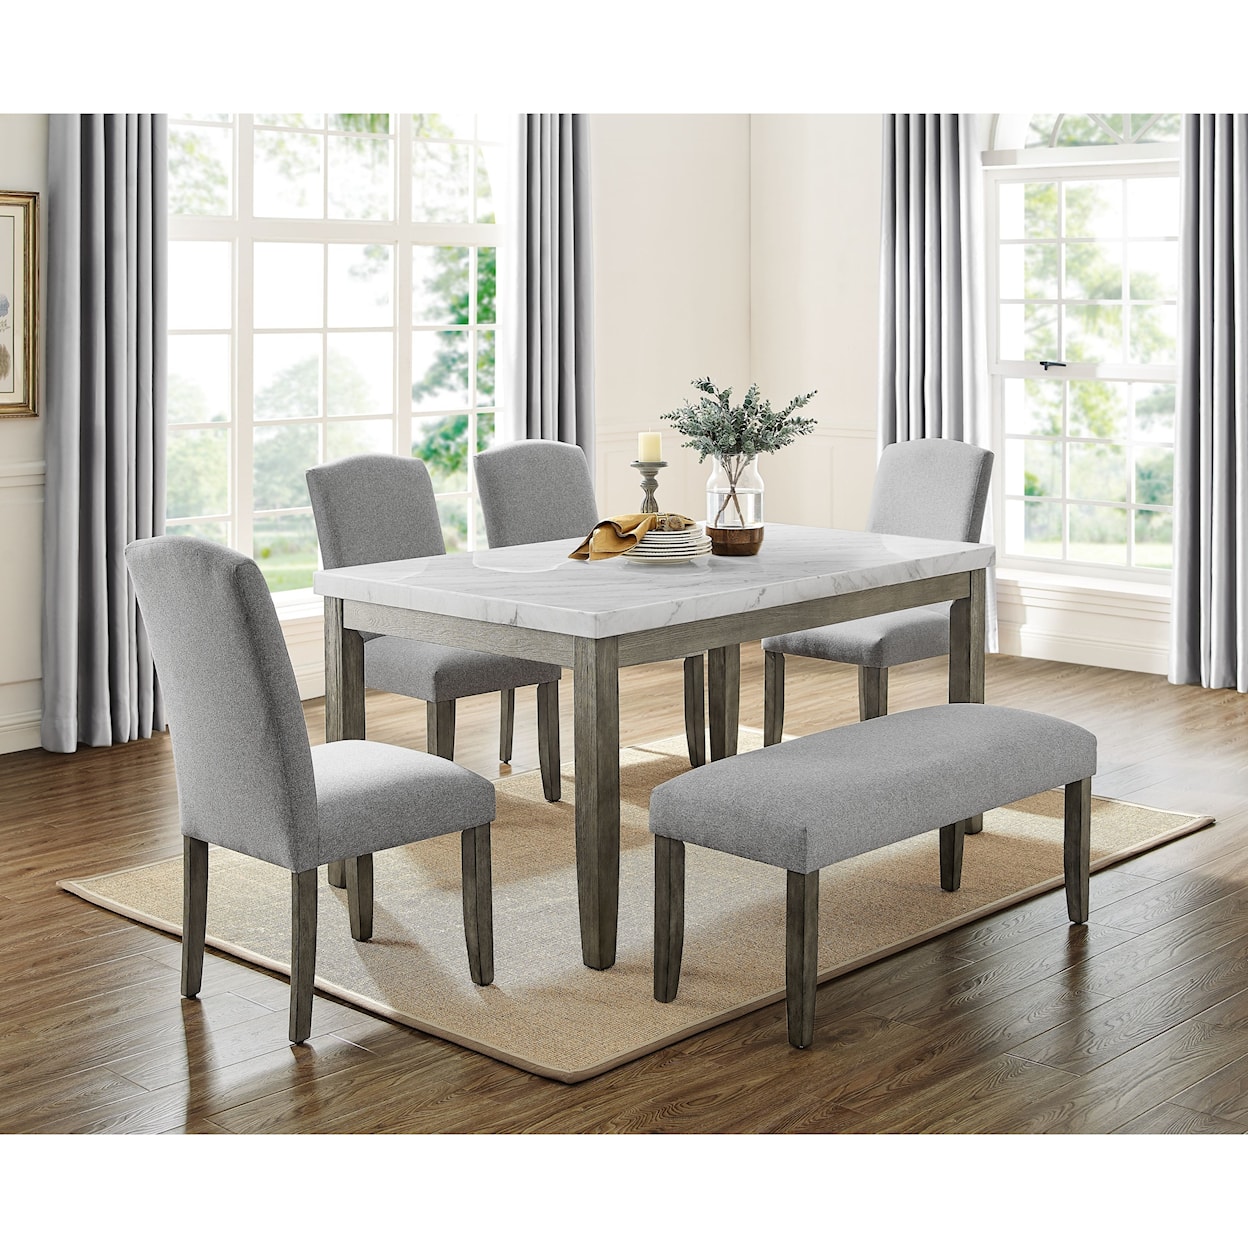 Steve Silver Emily Table & Chair Set with Bench